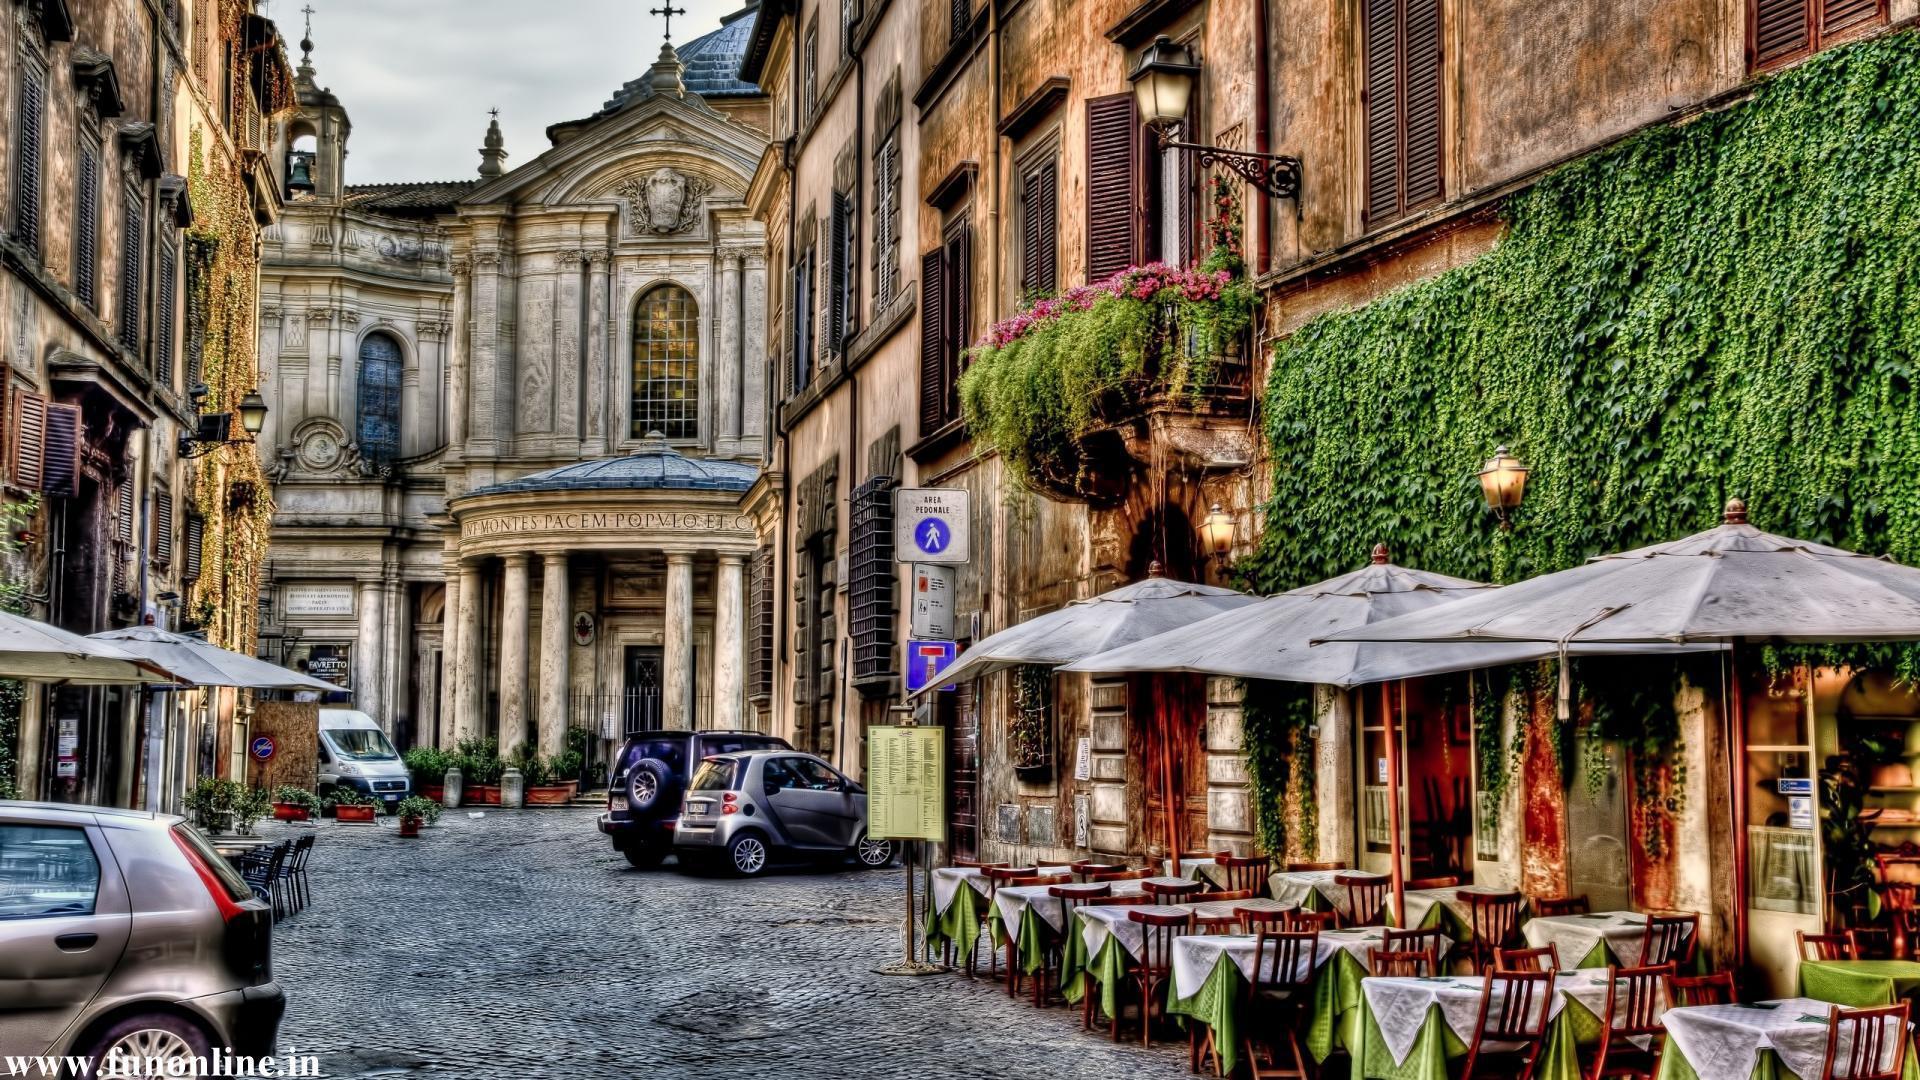 Old street in Rome wallpaper and image, picture, photo